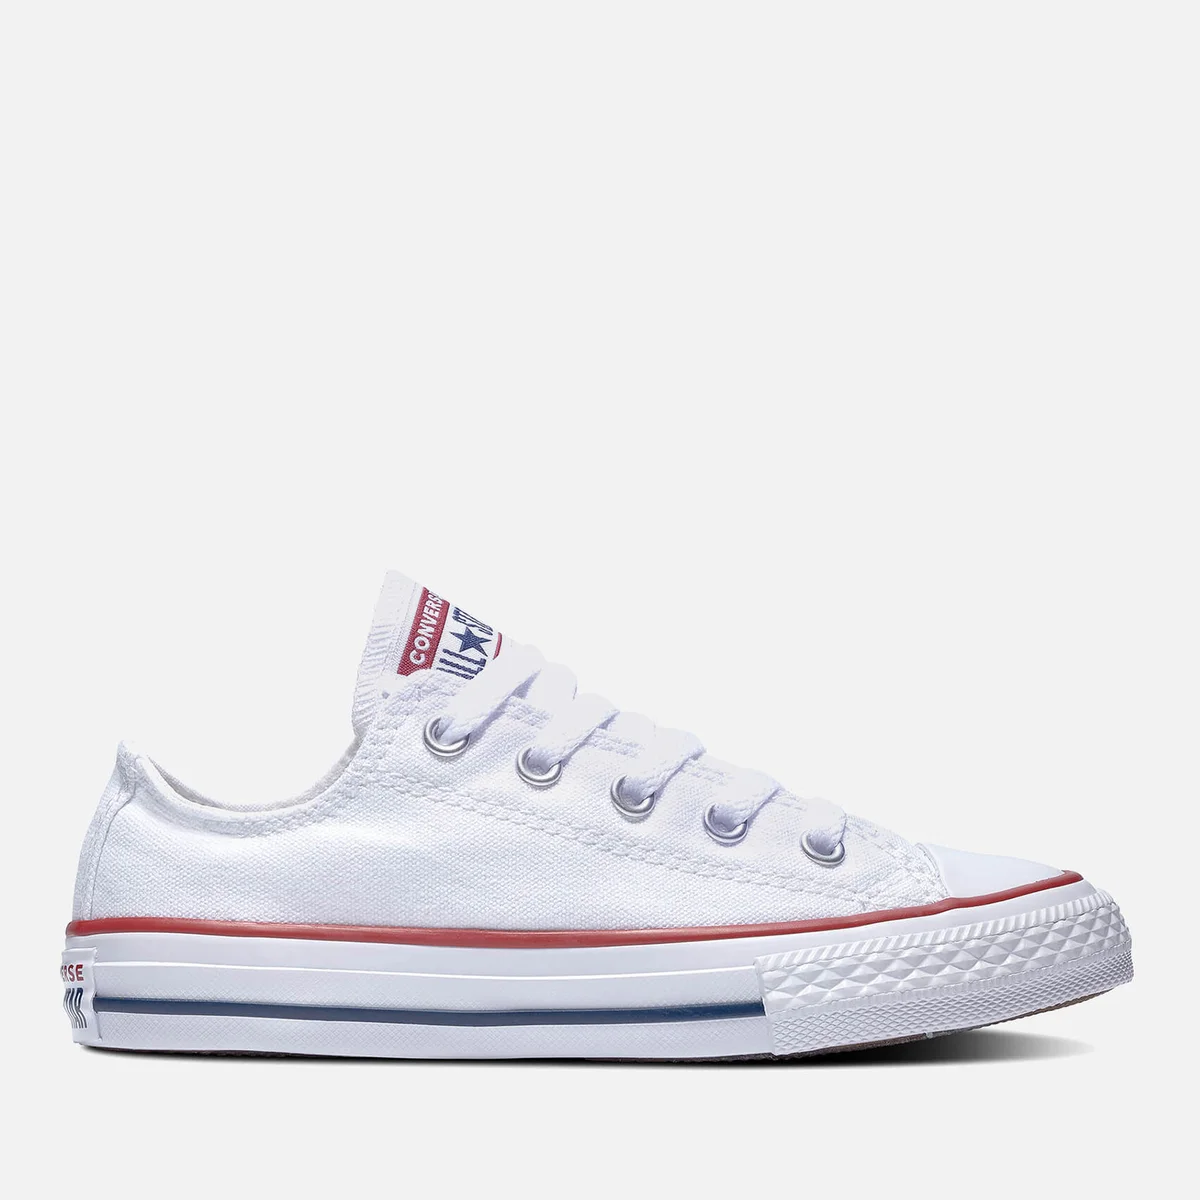 Converse Kids' Chuck Taylor All Star Ox Trainers - White Image 1